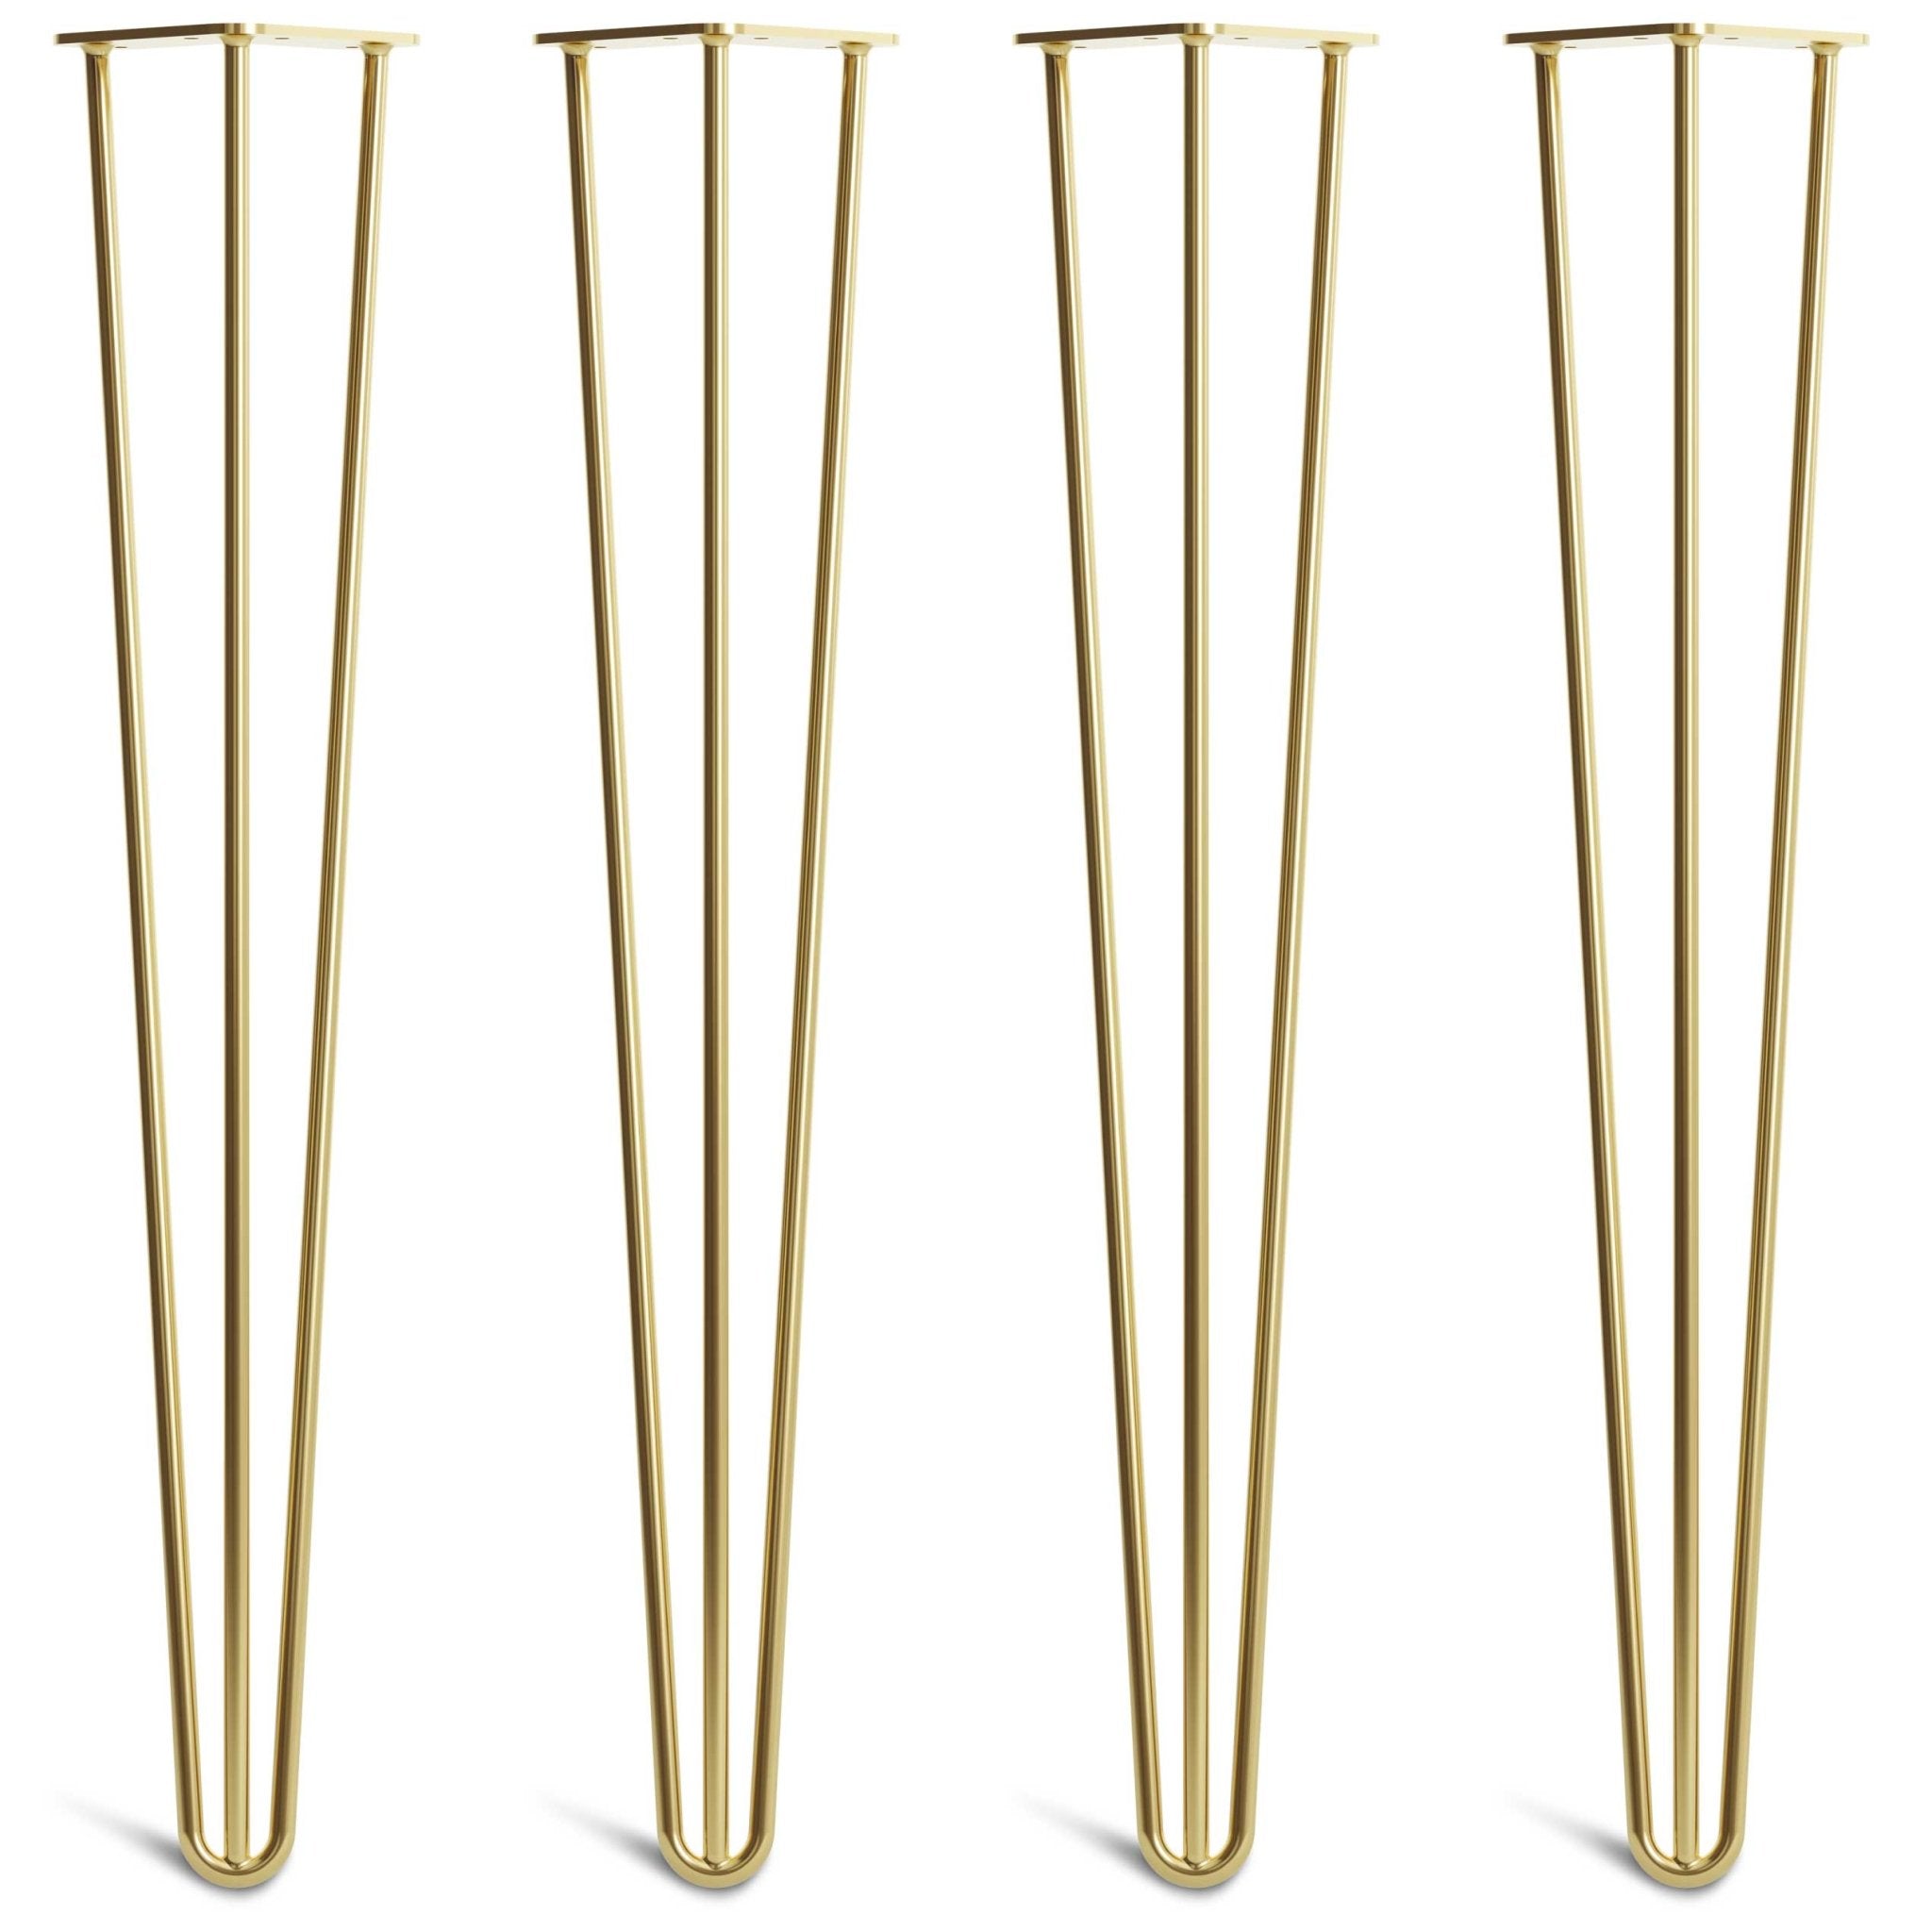 Gold Hairpin Legs-28" / 71cm - Desk & Dining Table-3 Rod-The Hairpin Leg Co.